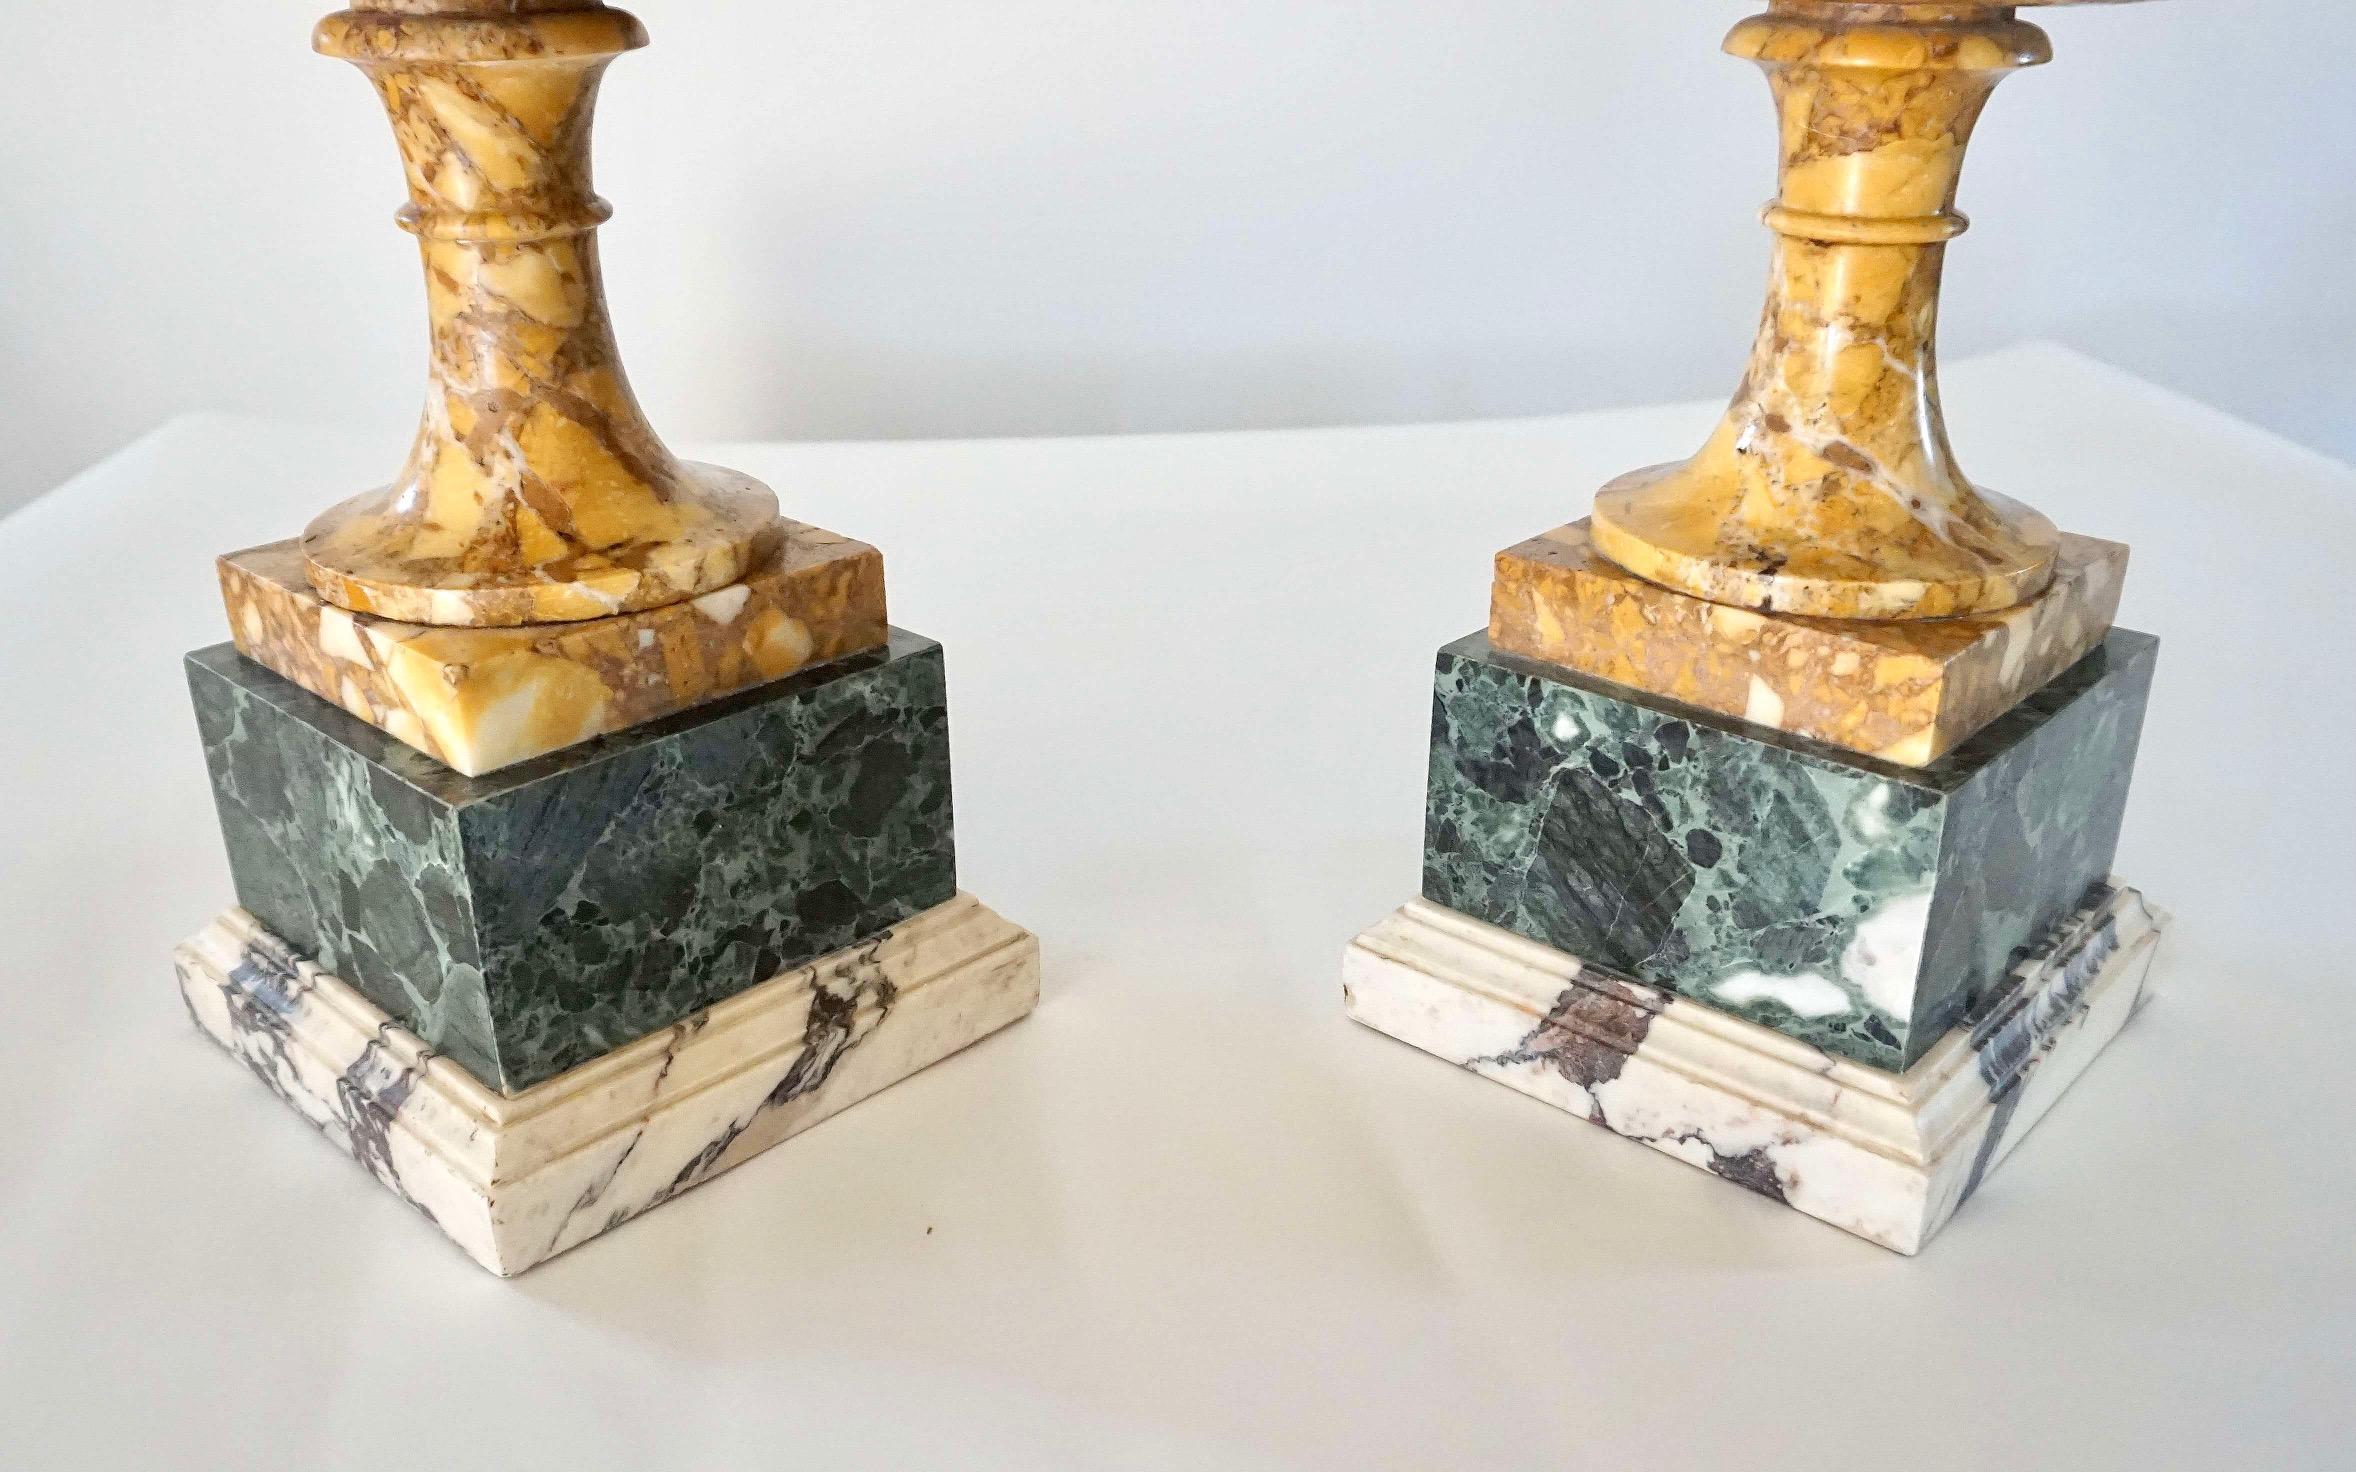 Pair of 19th Century Italian Neoclassical Tazze in Polychrome Marbles For Sale 8